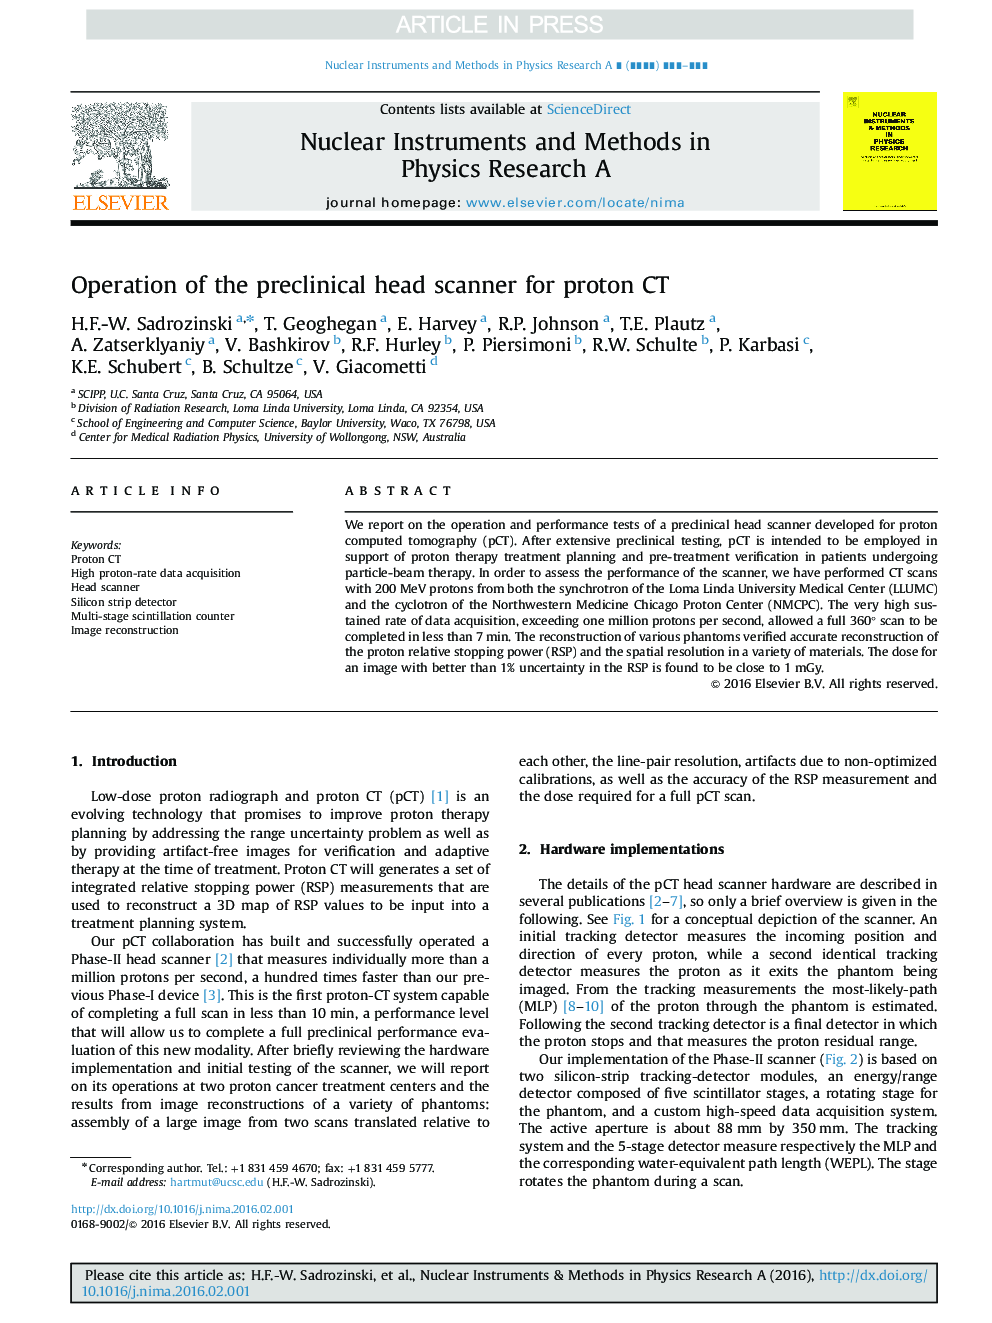 Operation of the preclinical head scanner for proton CT